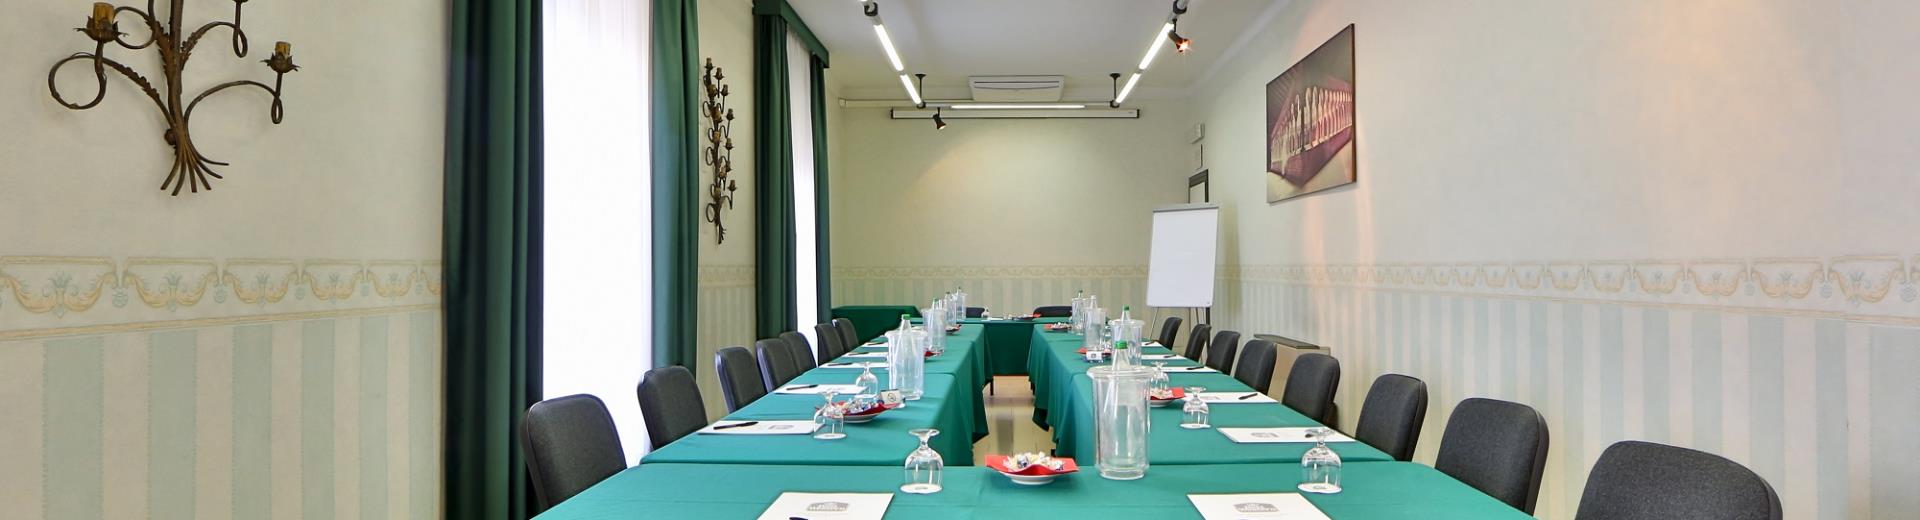 Meeting rooms and meeting rooms at the Hotel San Donato Bologna